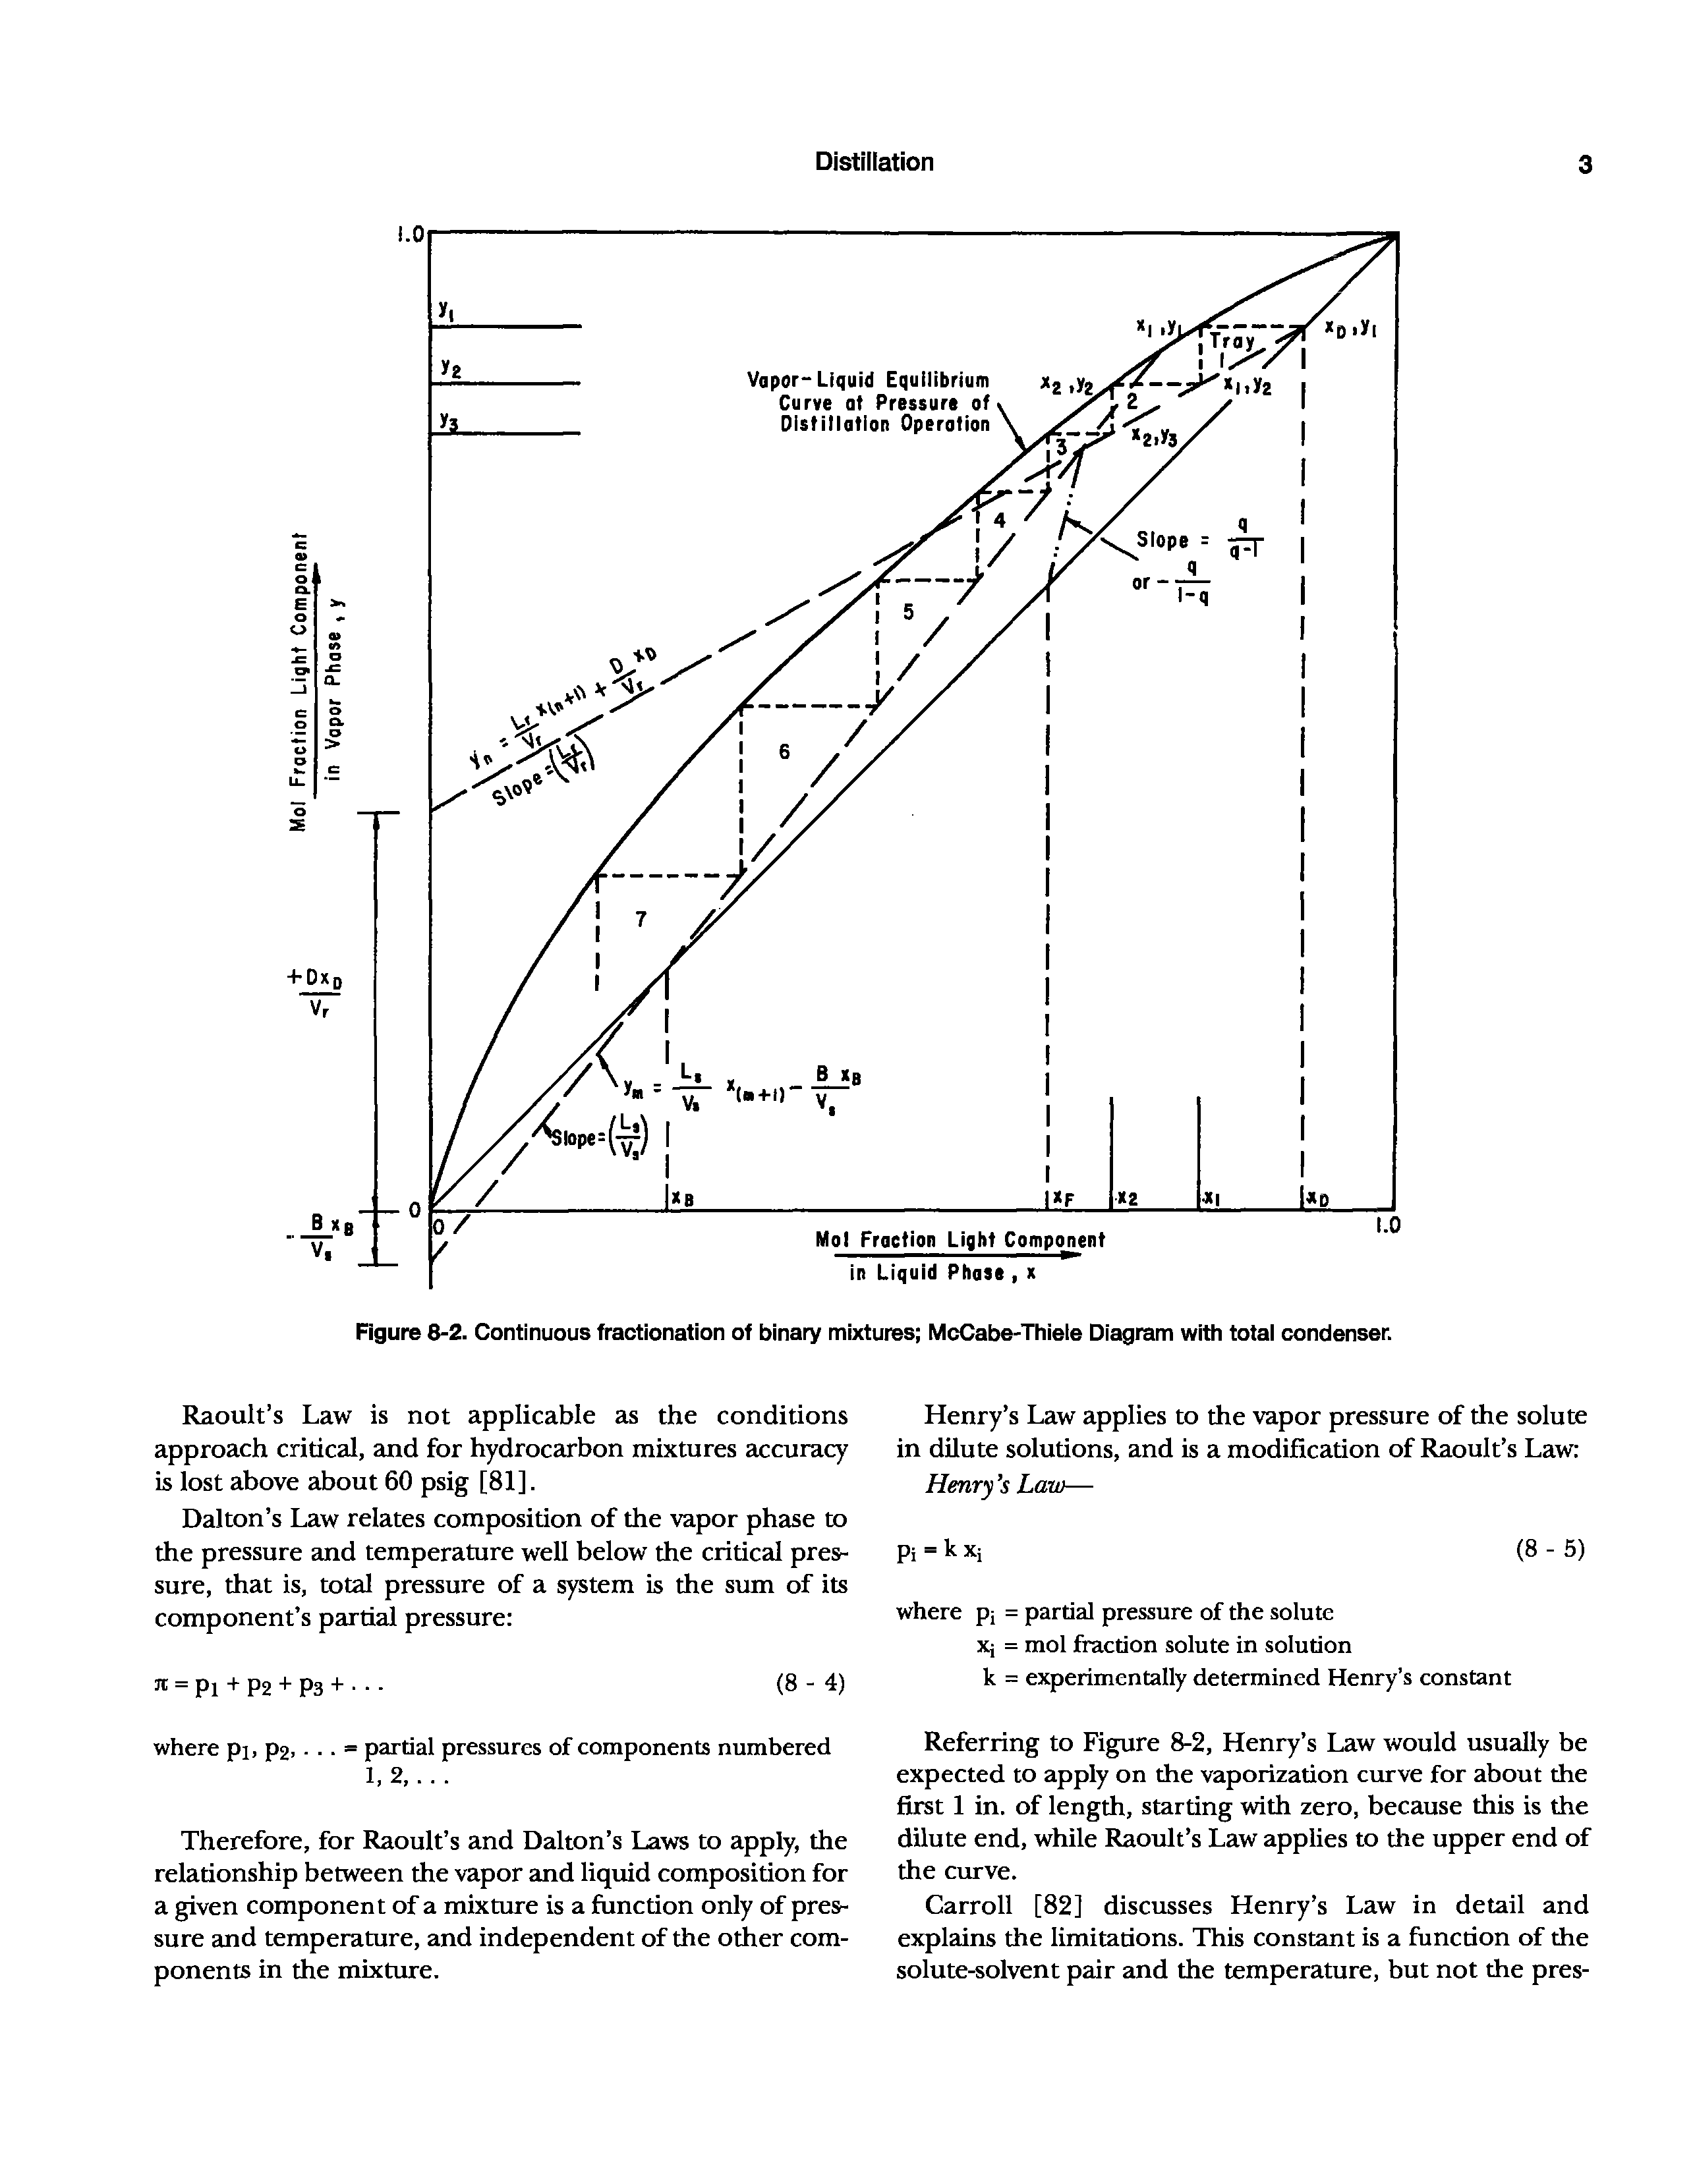 Figure 8-2. Continuous fractionation of binary mixtures McCabe-Thieie Diagram with total condenser.